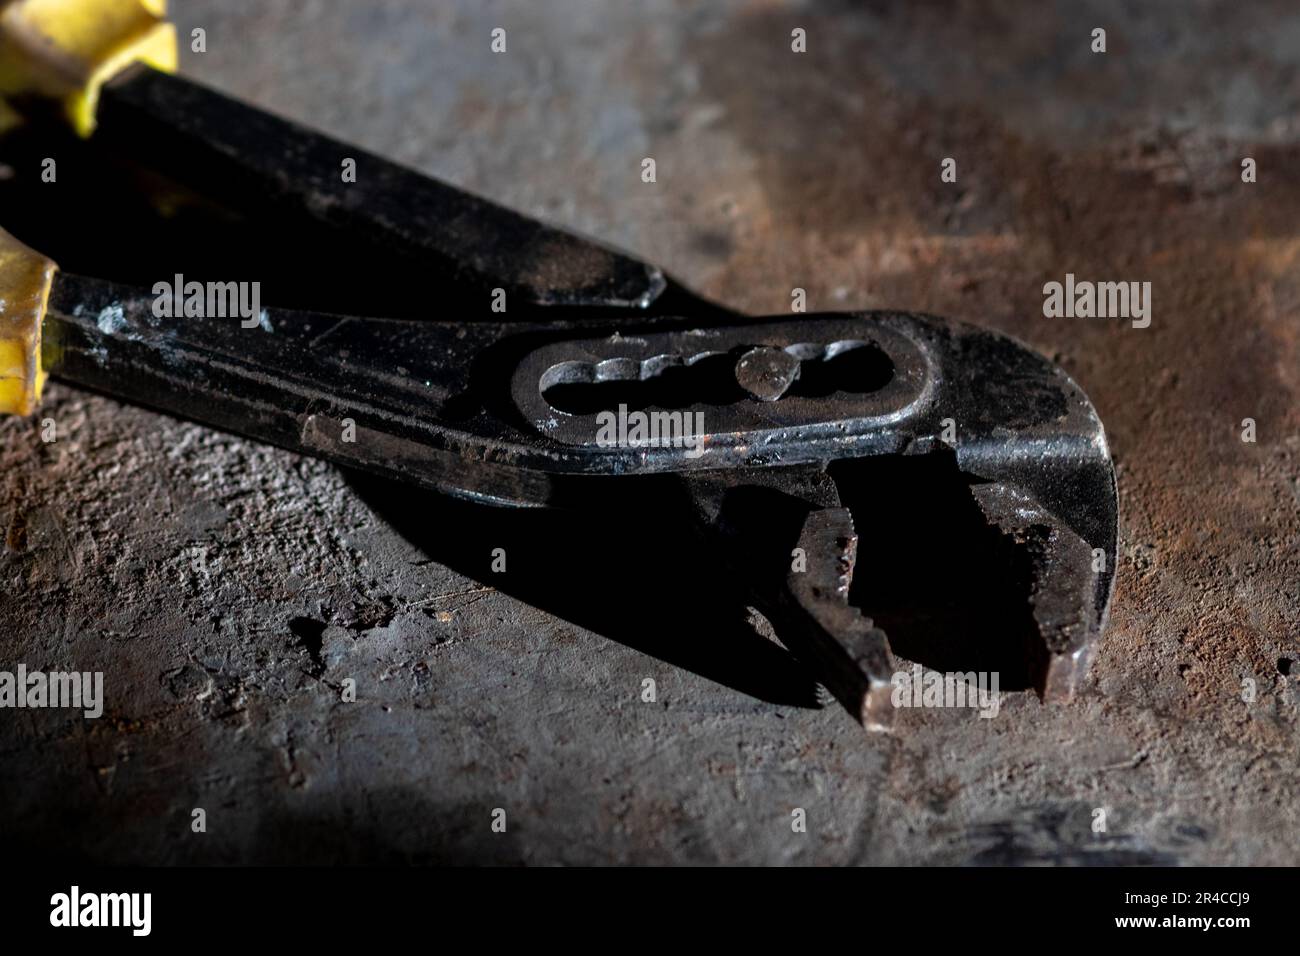 A vintage metallic tool resting on top of an antiquated metallic object Stock Photo